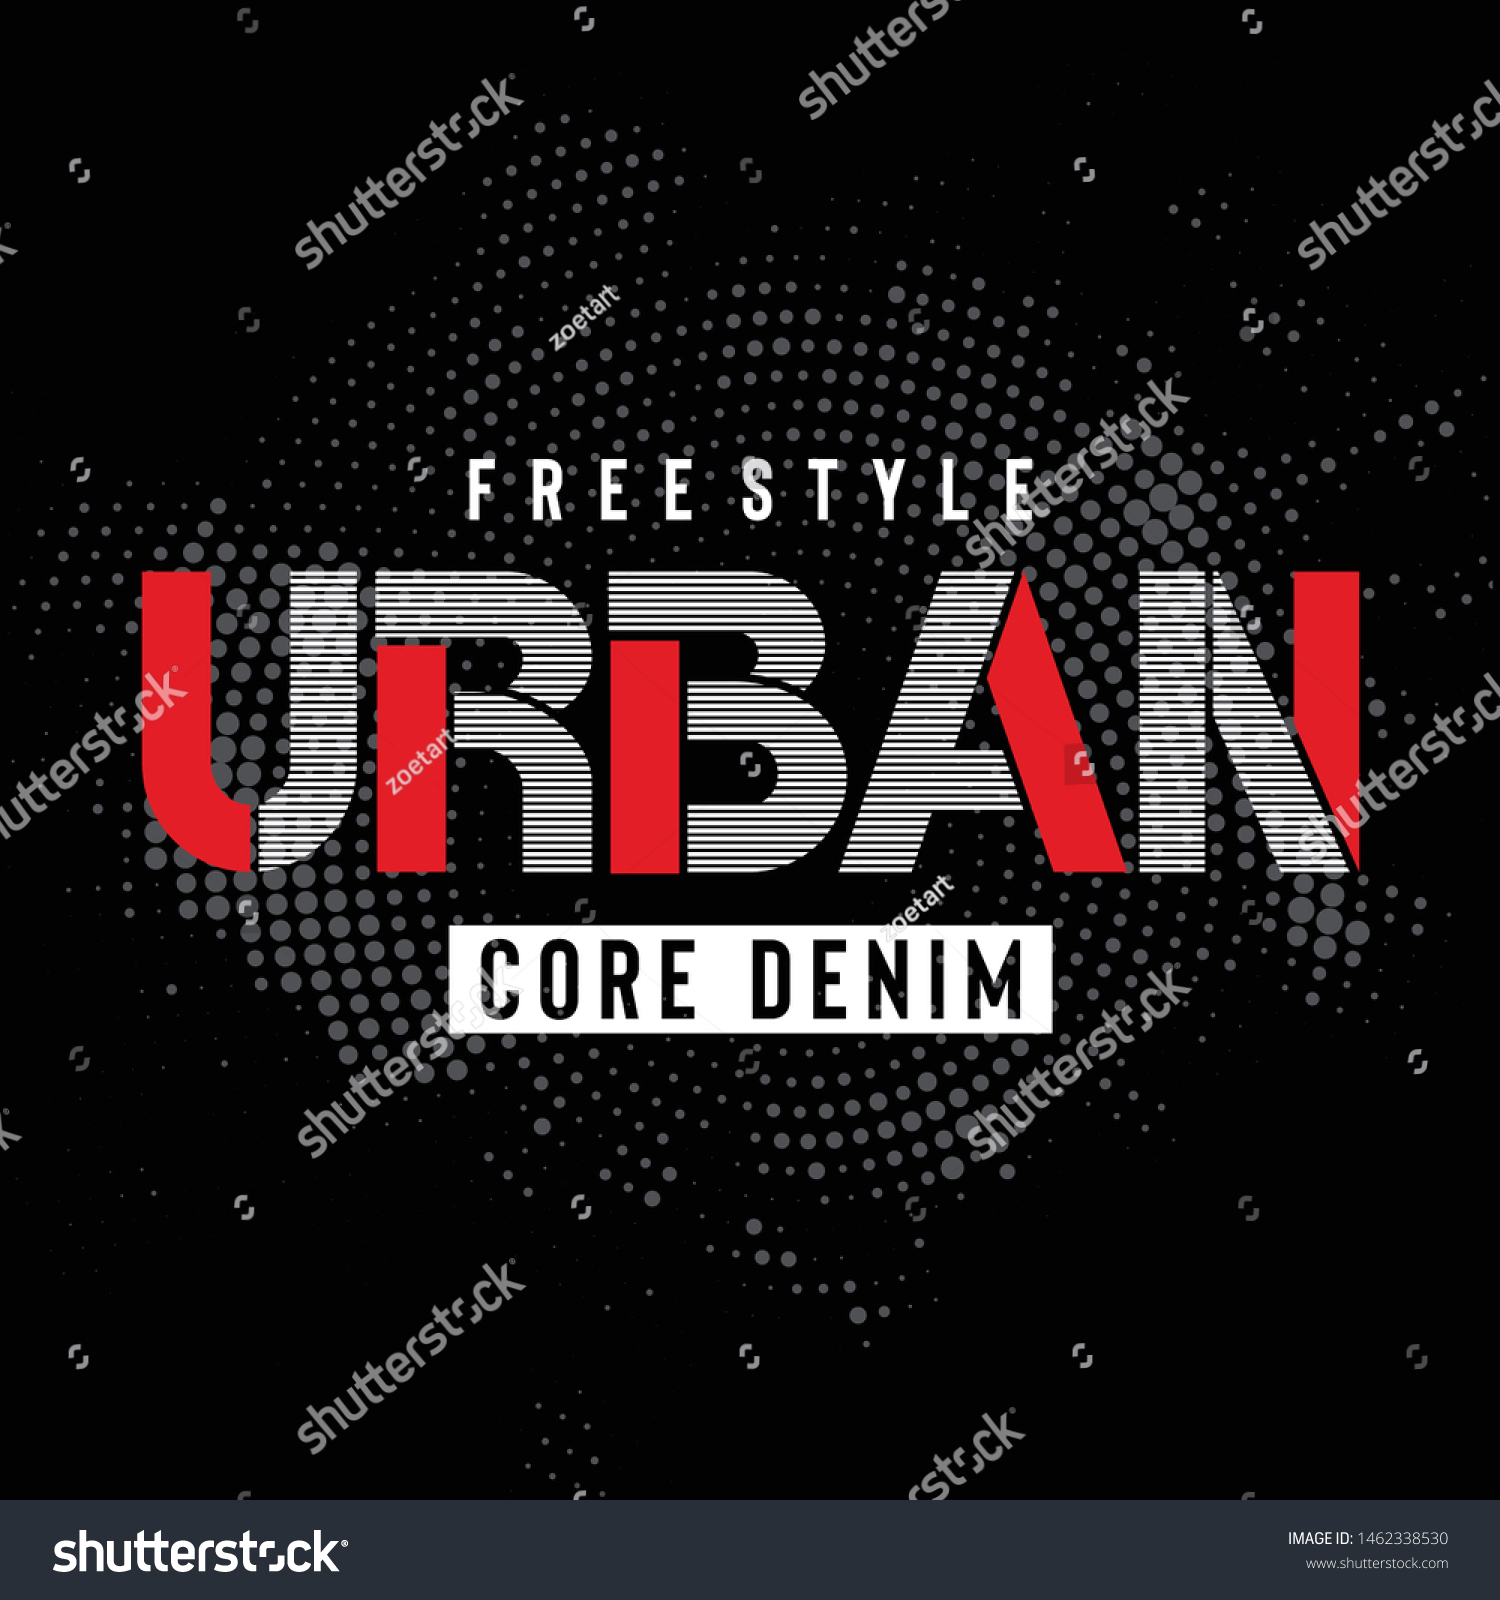 Free Style Urban Typography Tee Print Stock Vector (Royalty Free ...